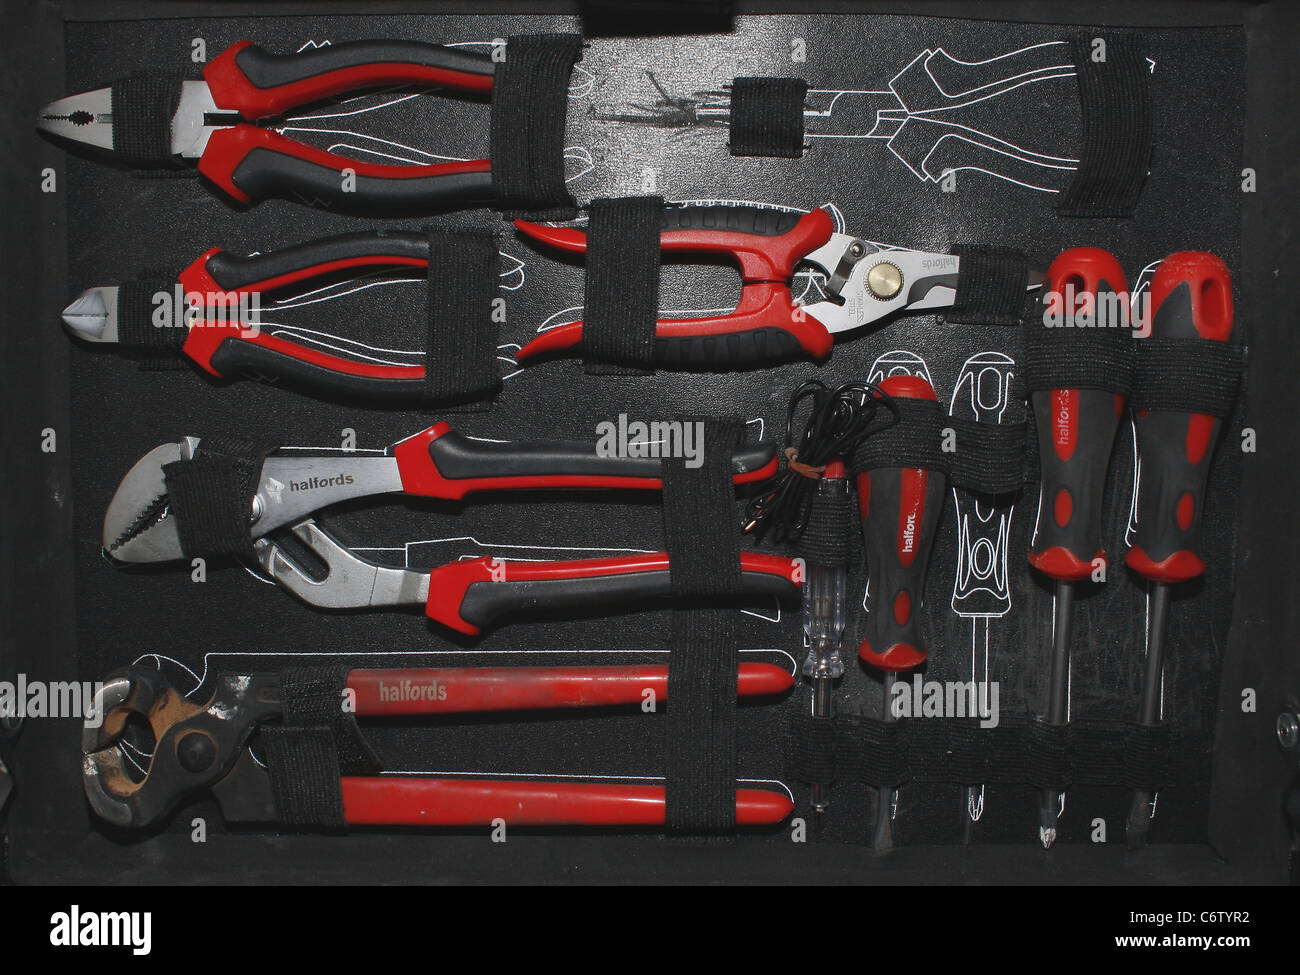 image of various halfords tools in tool box Stock Photo - Alamy